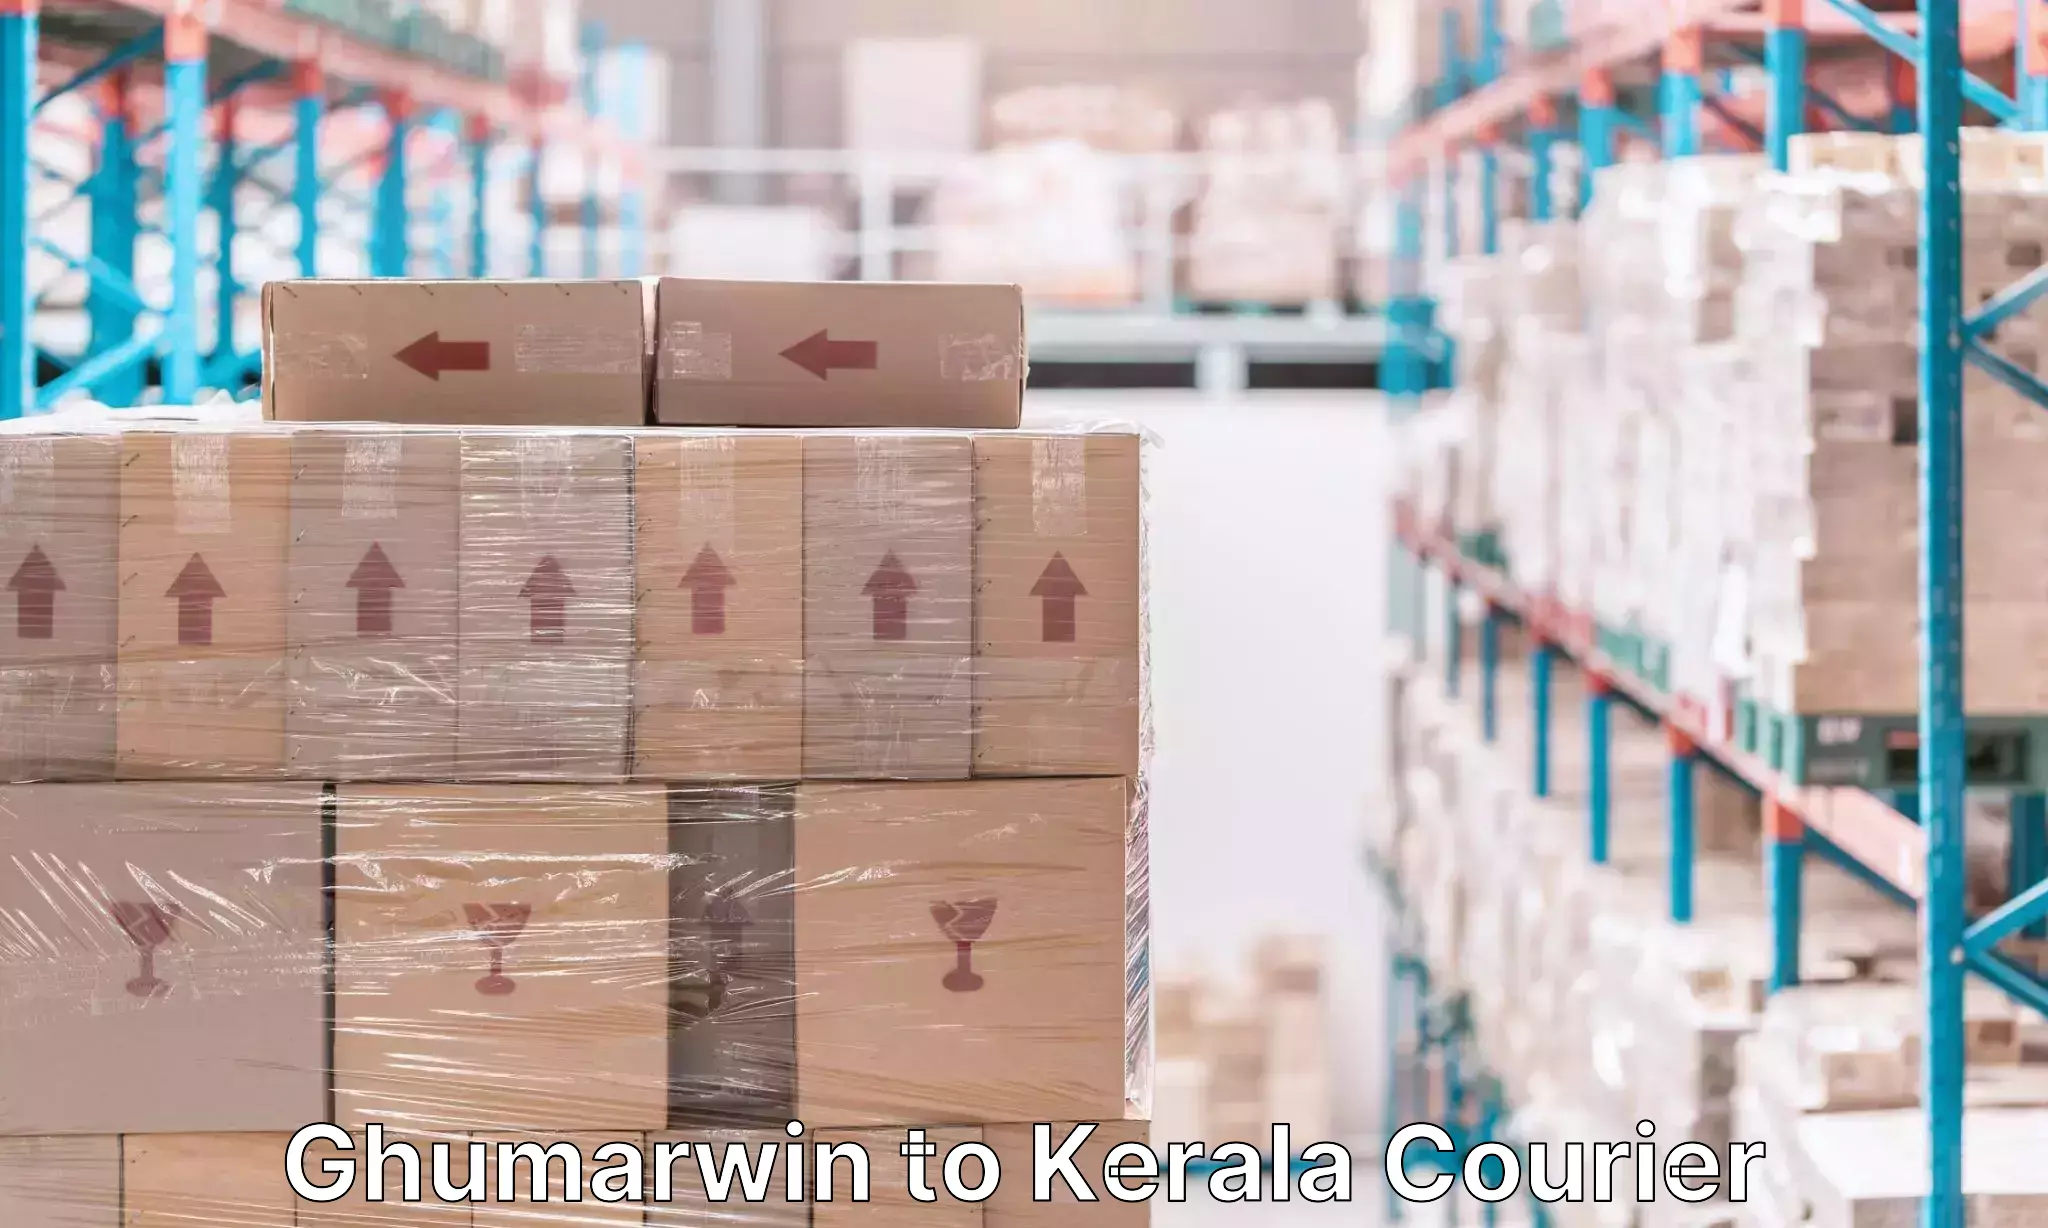 Luggage transport consulting Ghumarwin to Kerala